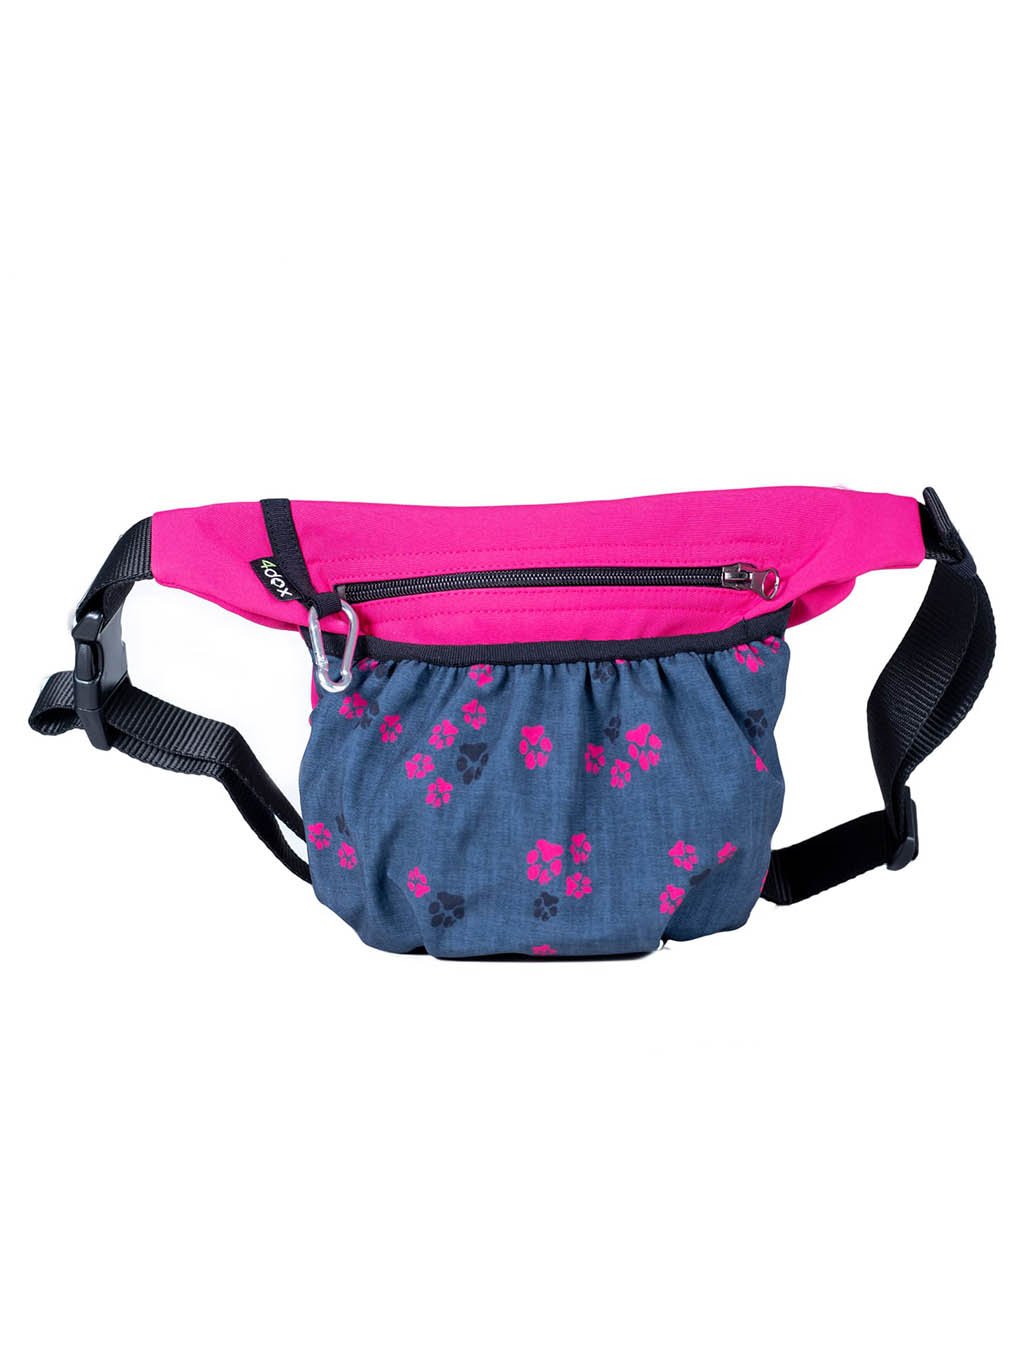 Dog training treat pouch with a magnetic fastening, pink No. 2